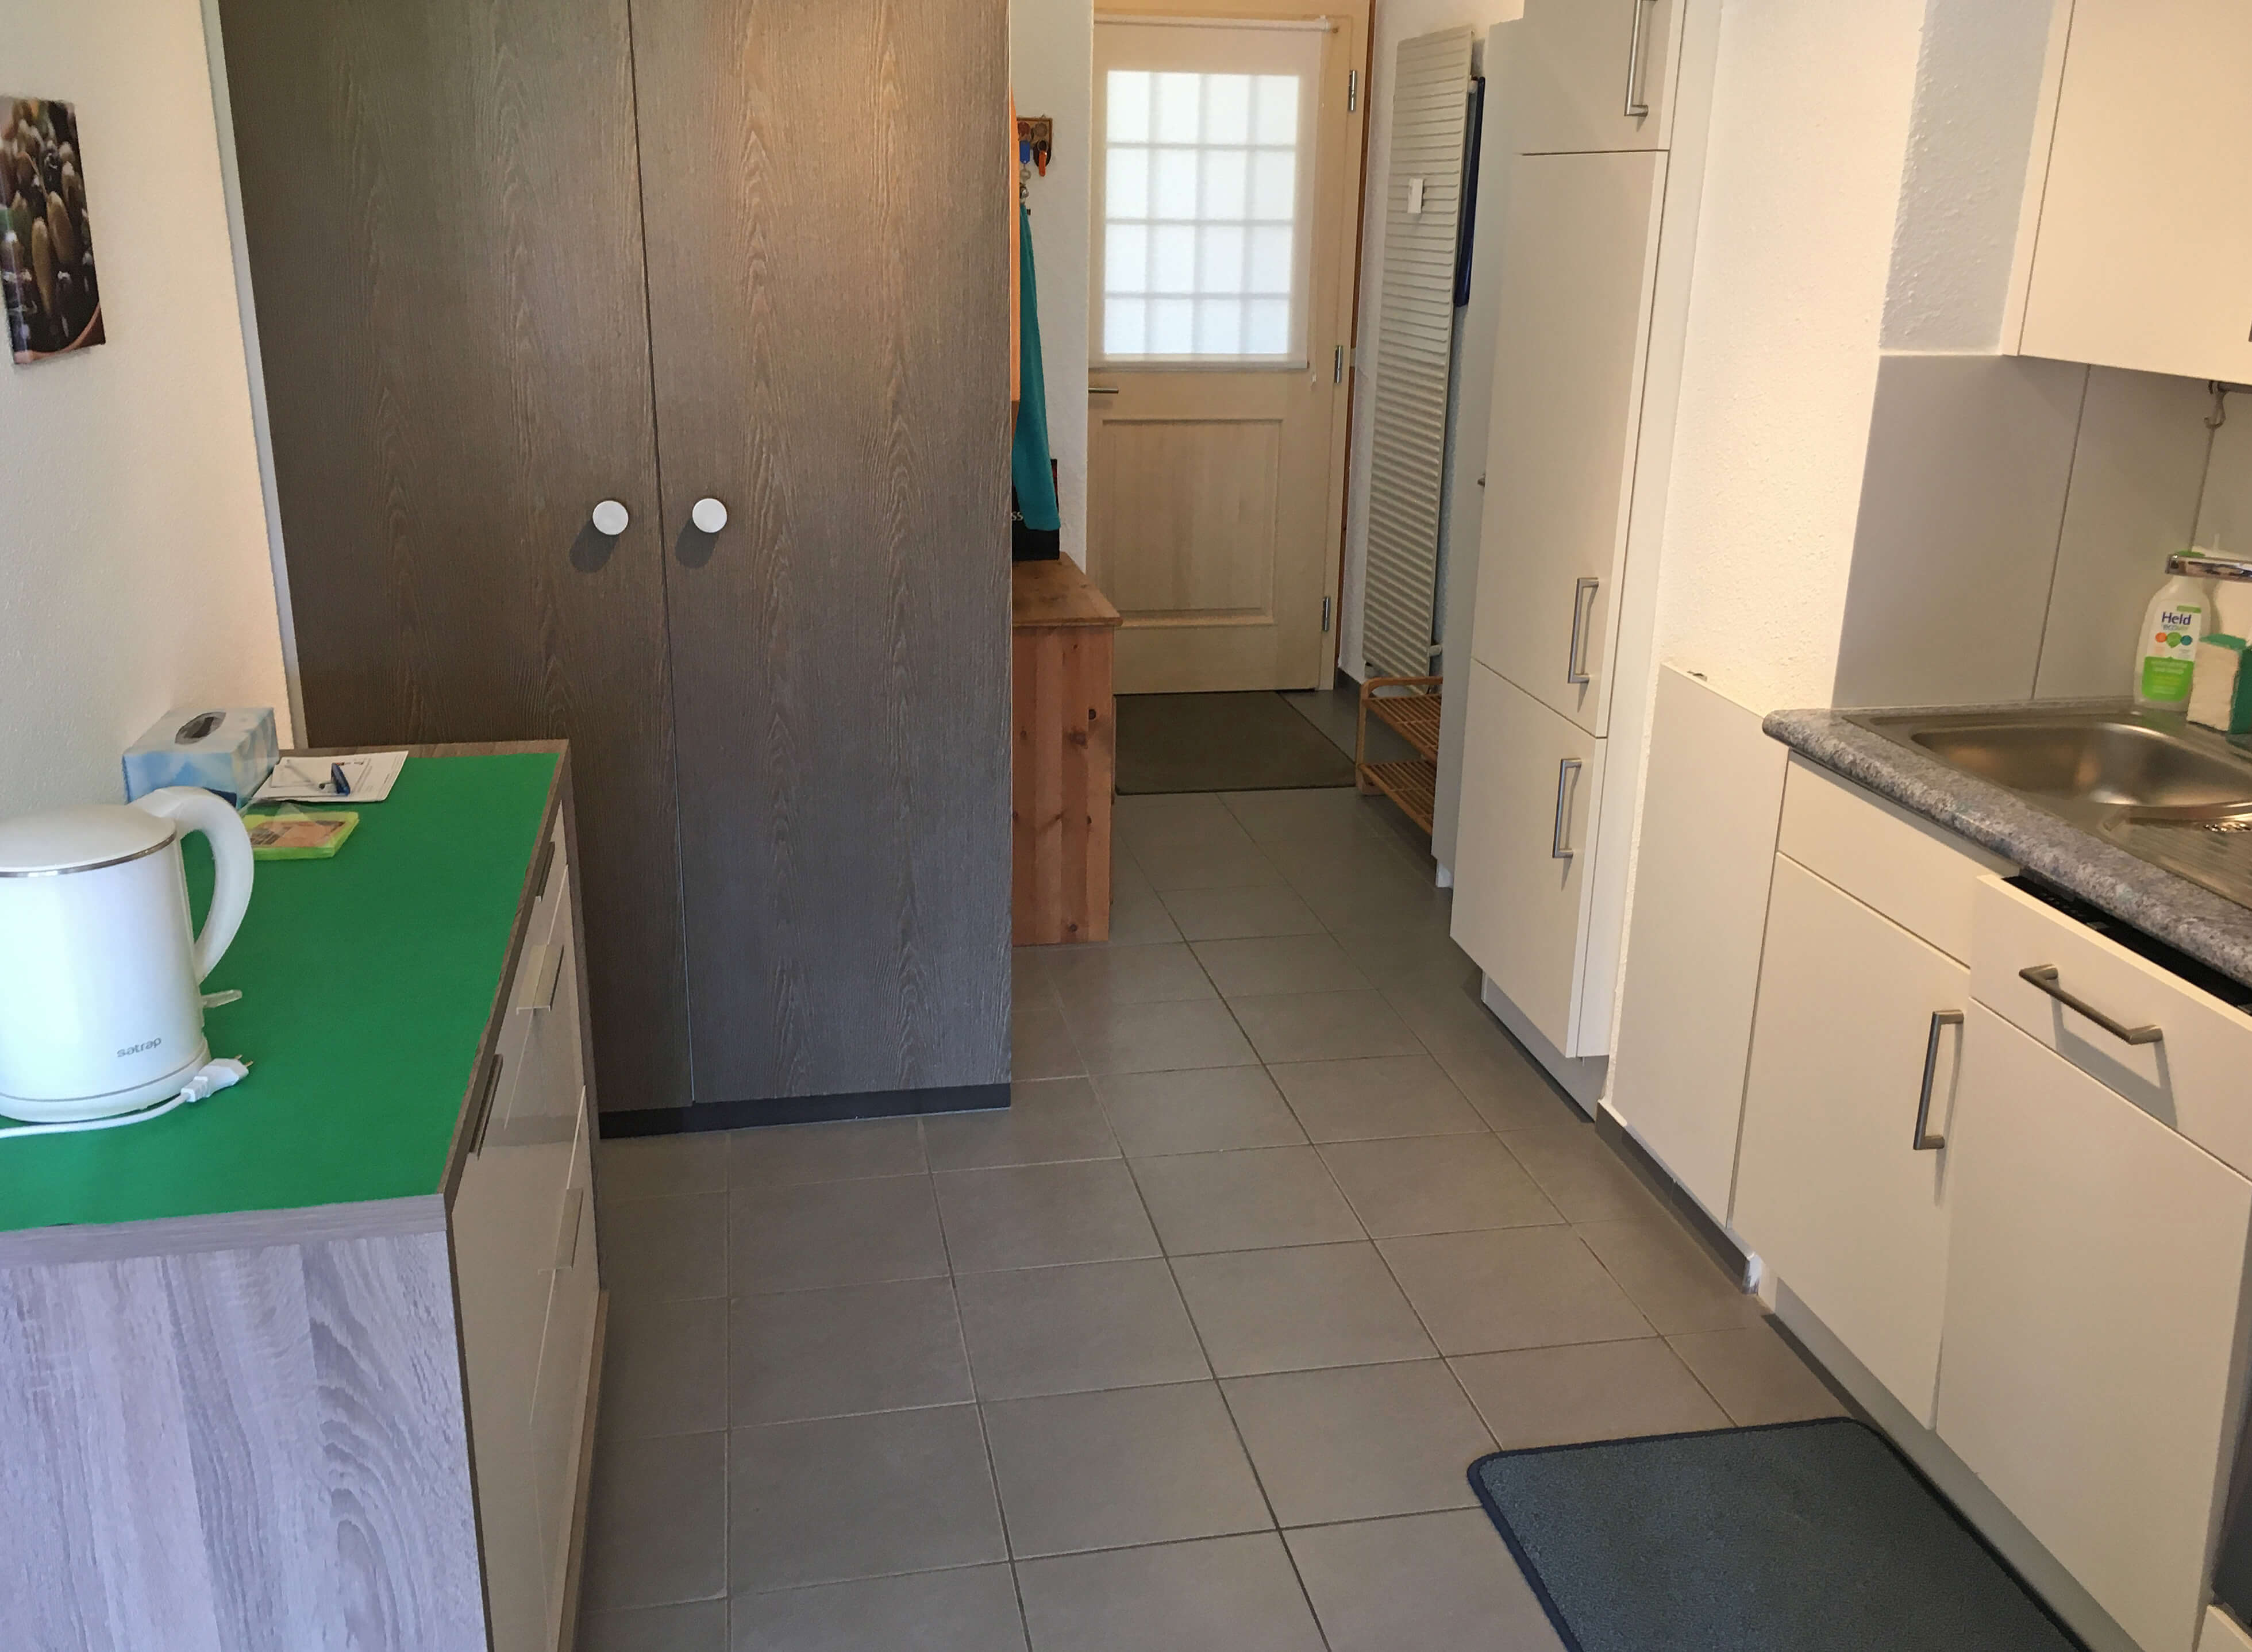 Kitchen and entrance area